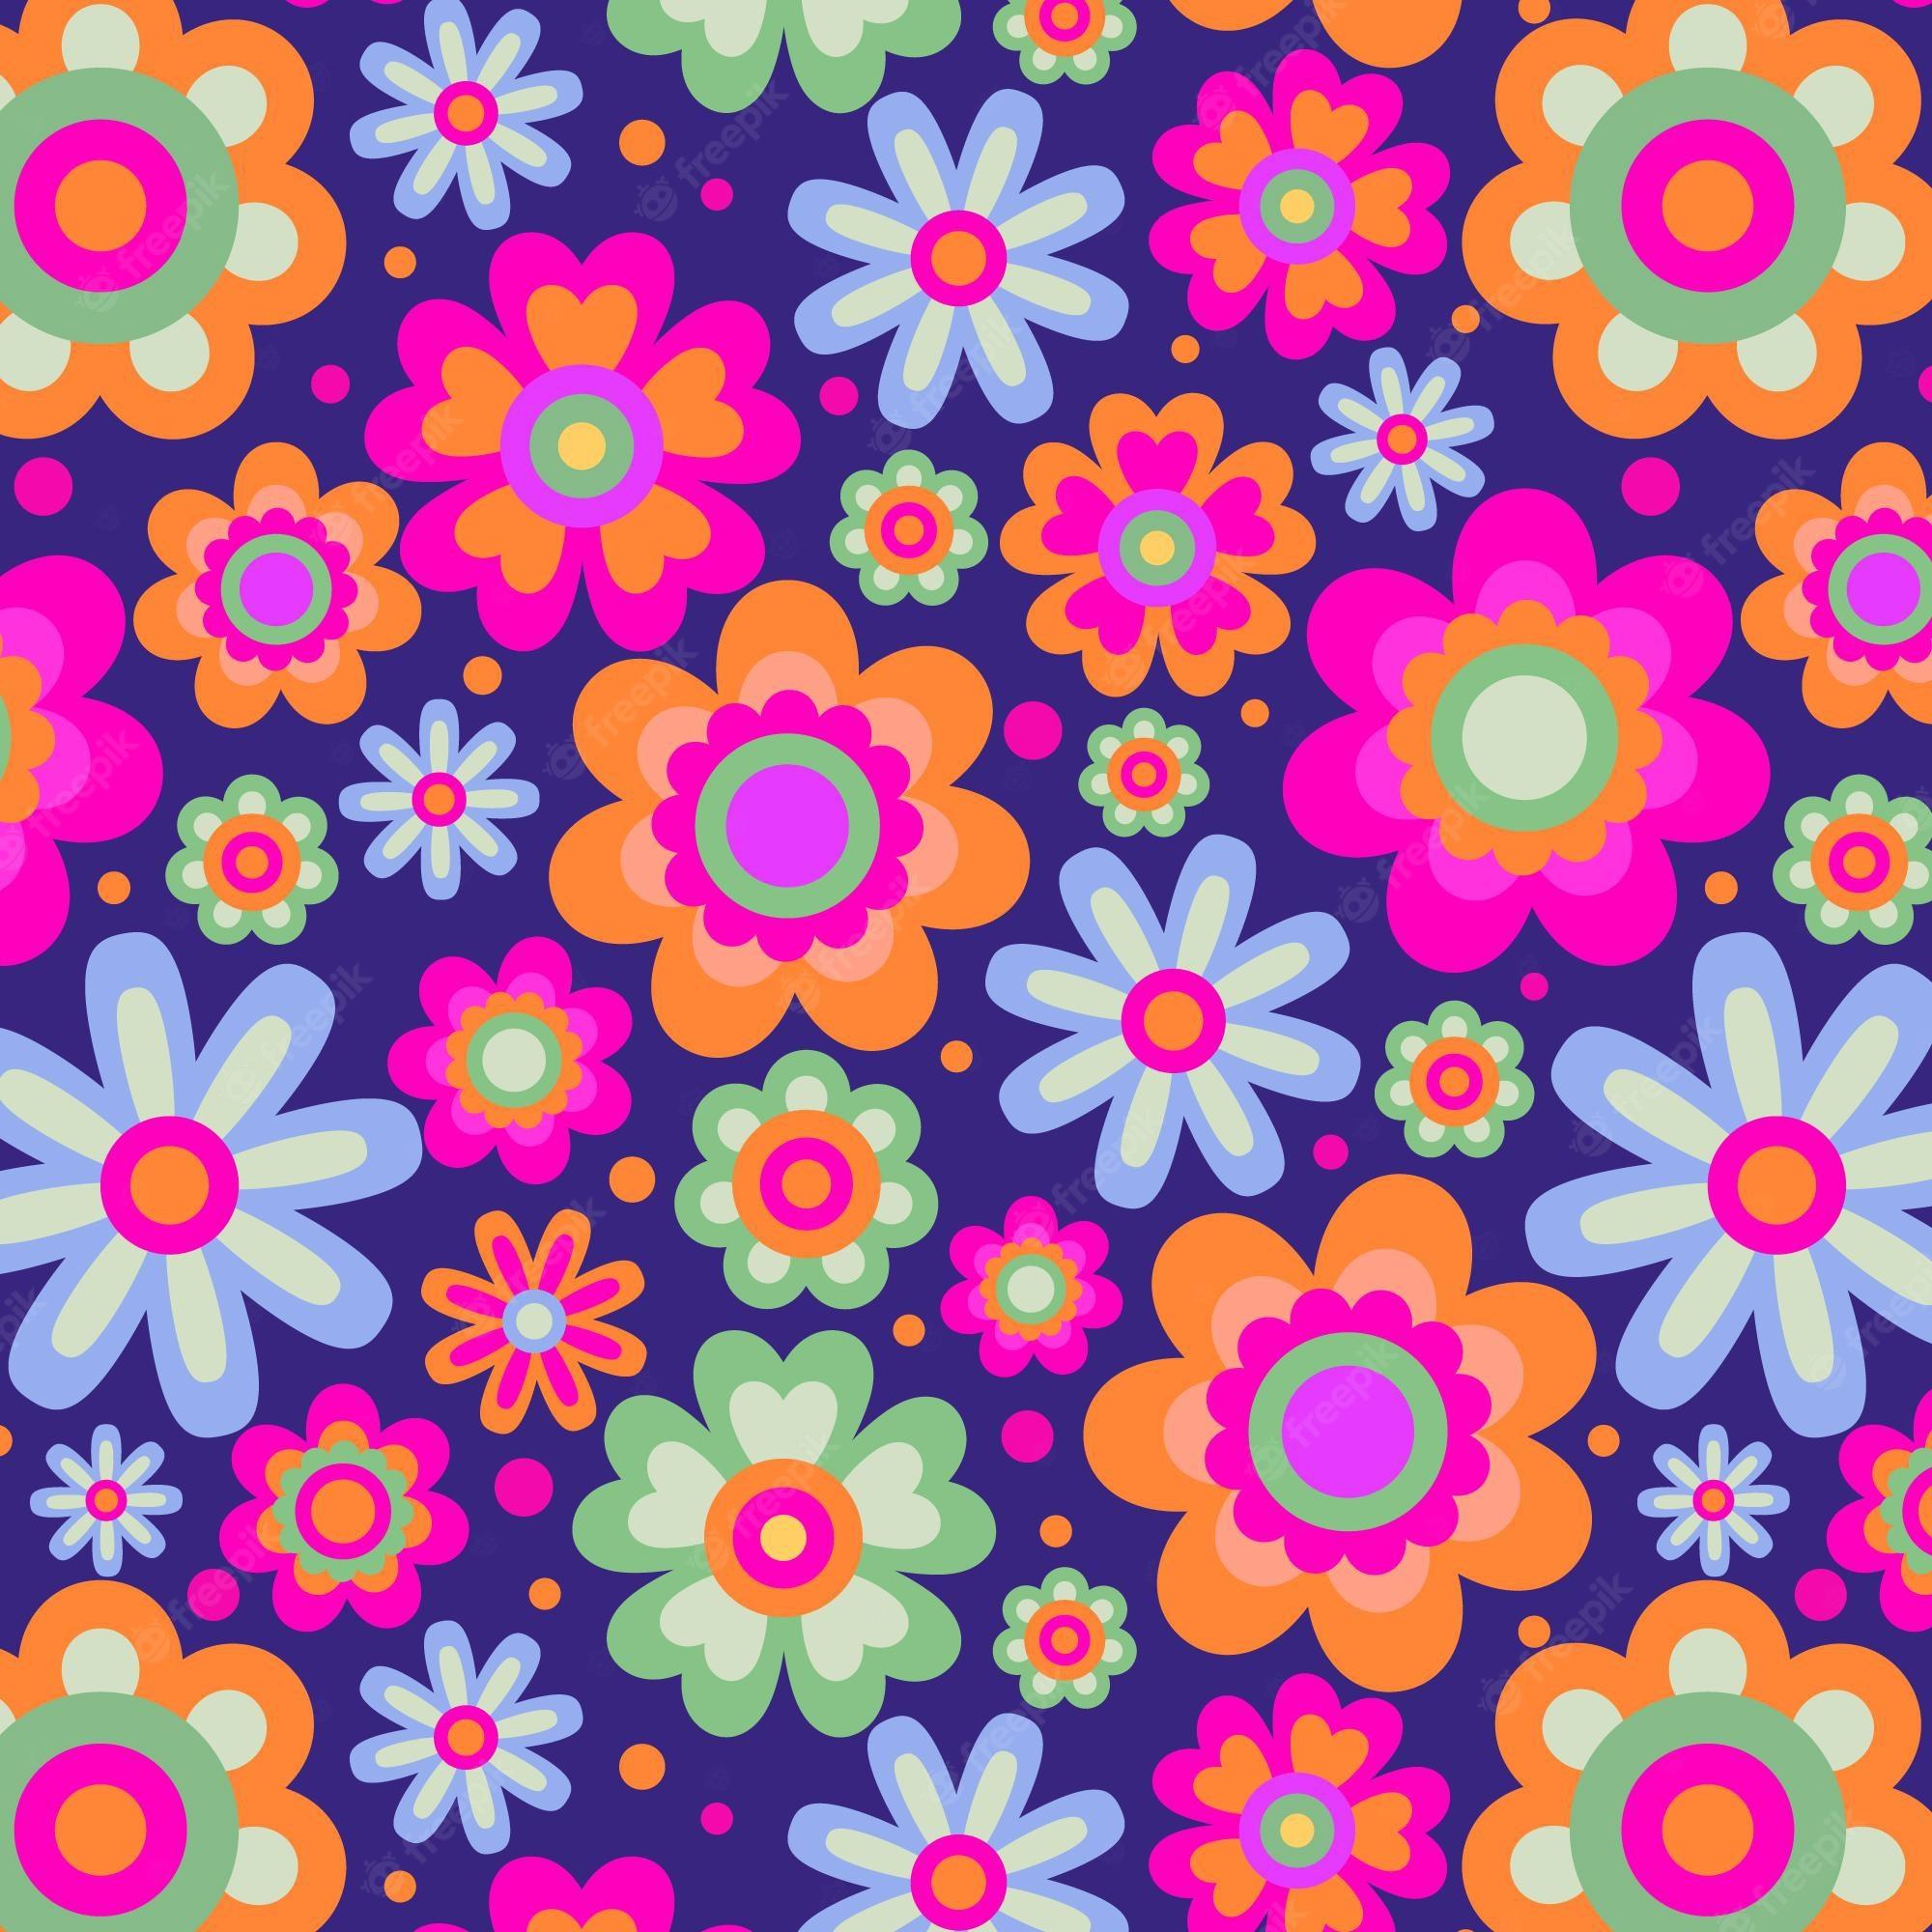 Premium Vector  Seamless pattern with colorful groovy flowers and smiling  faces 70s 80s 90s polka dot background